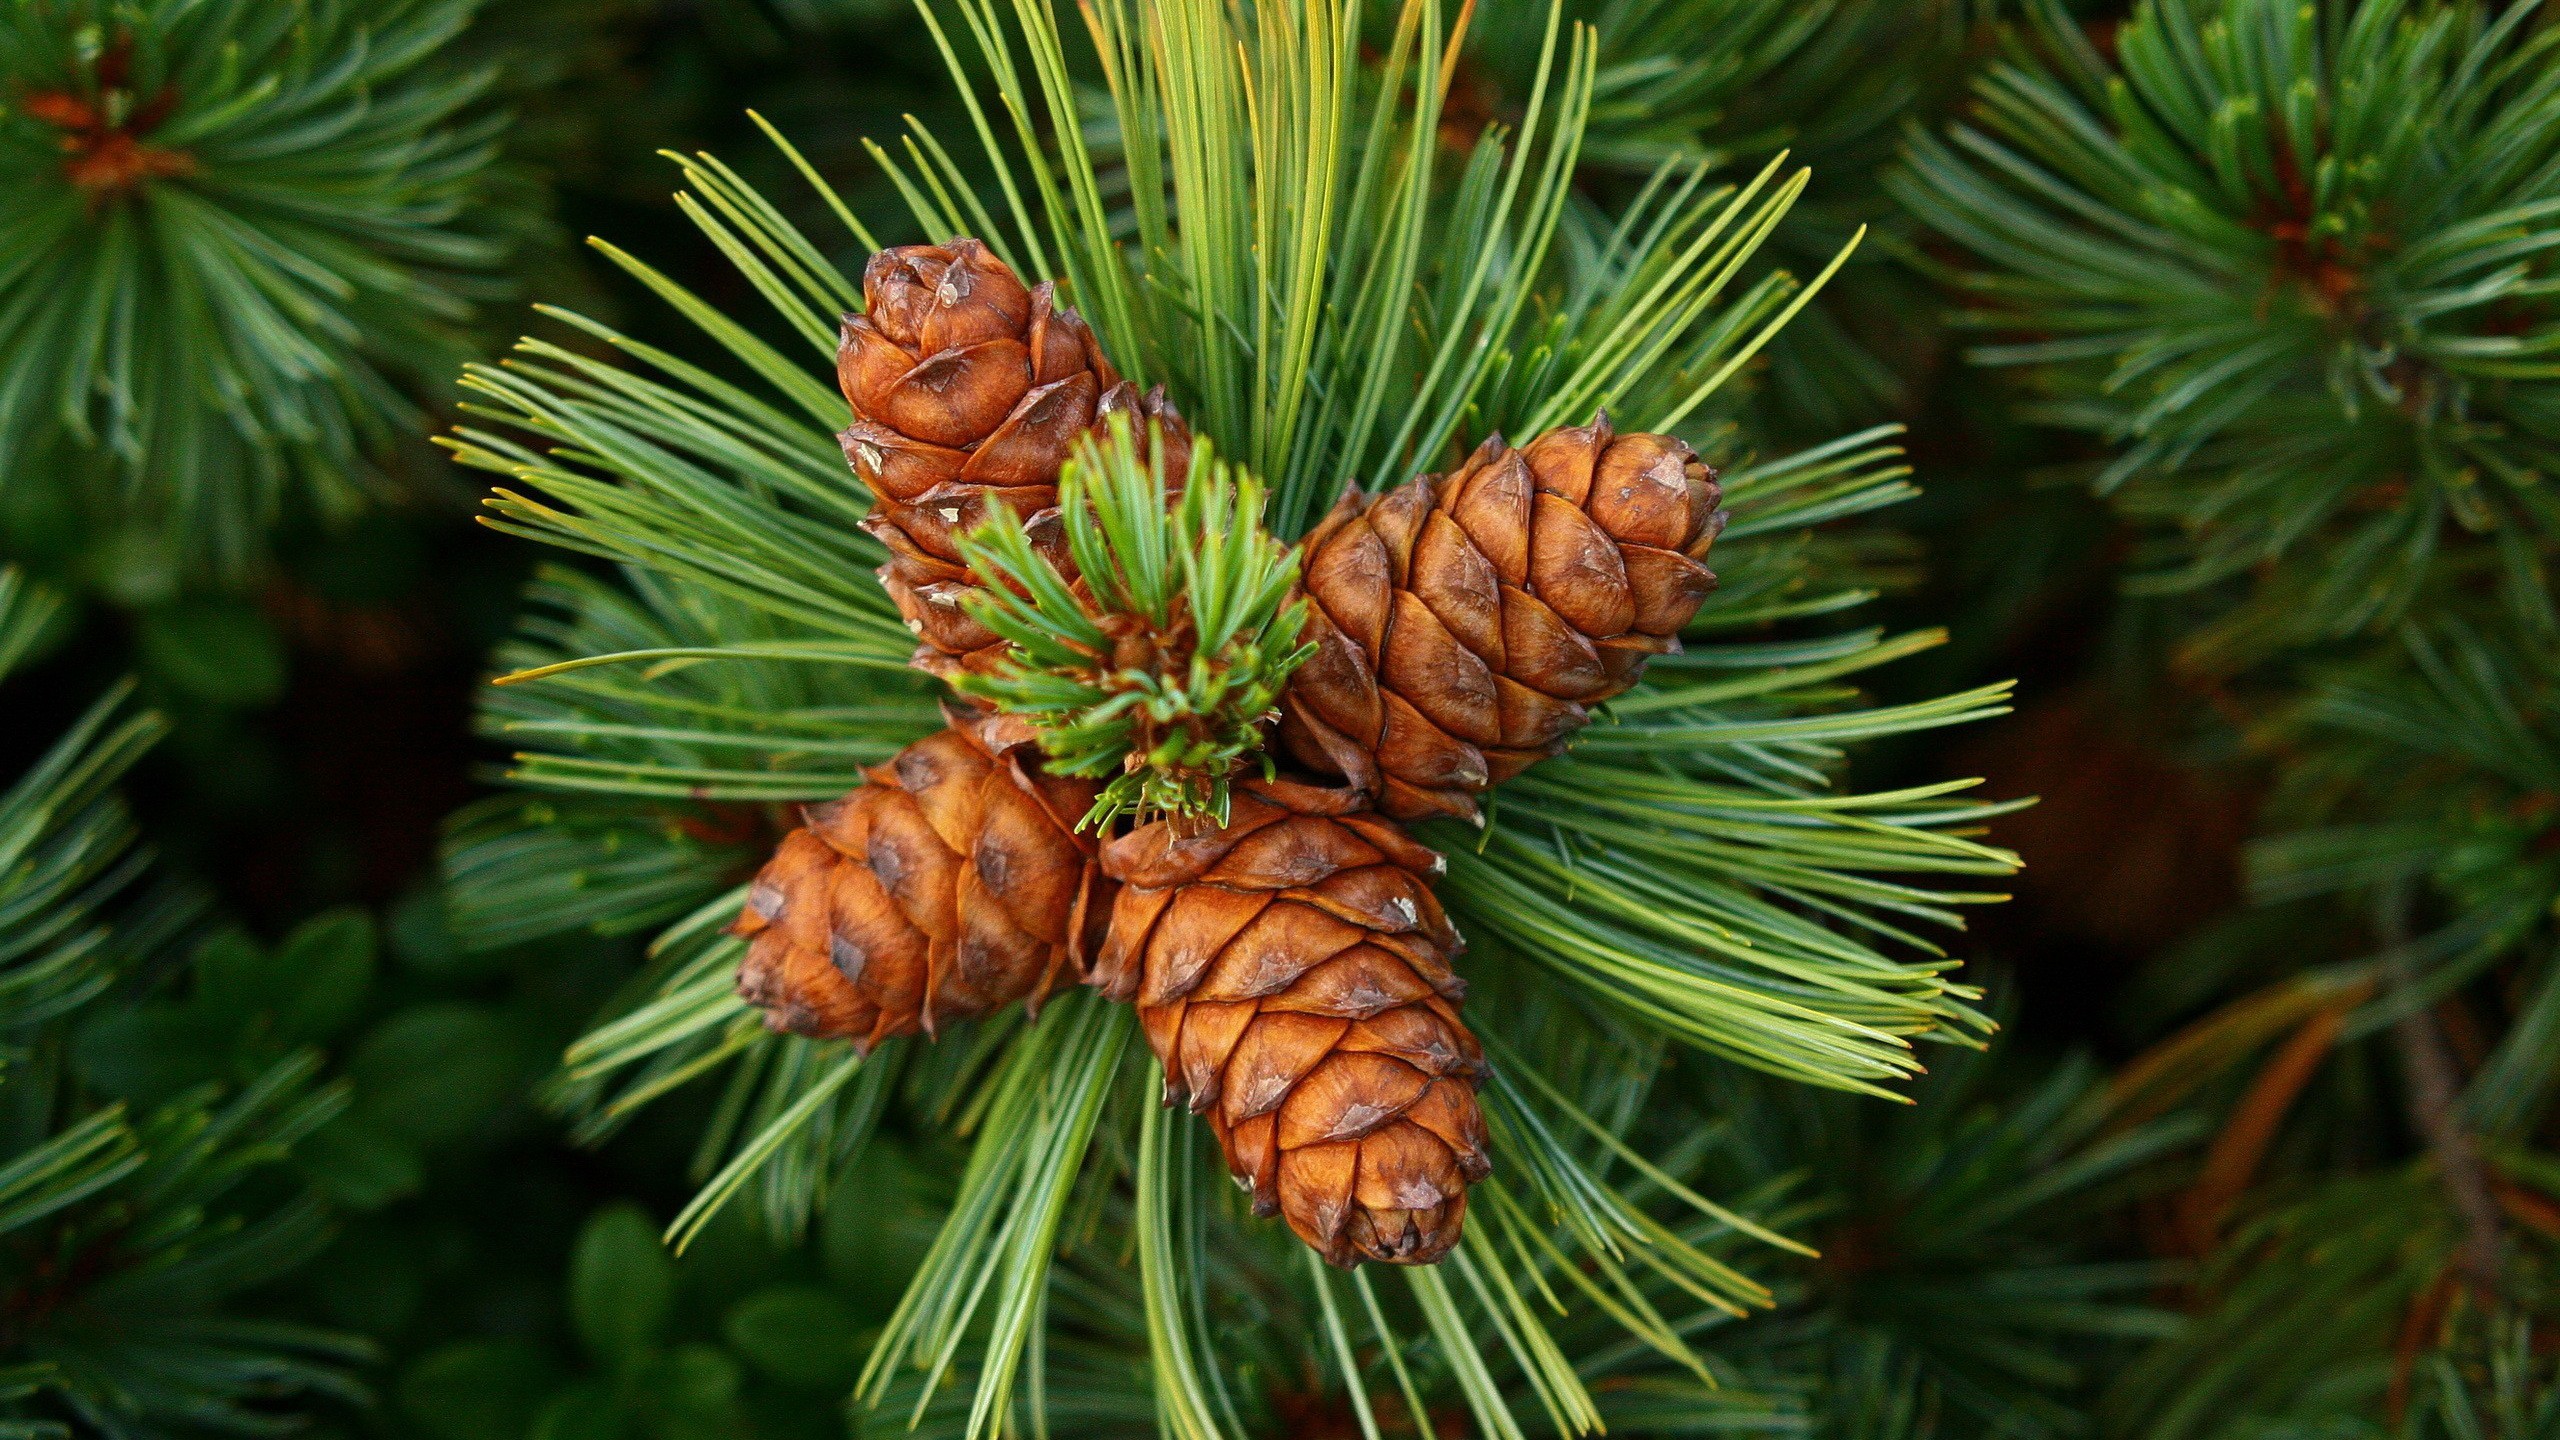 General 2560x1440 nature green forest clearing pine cones pine trees macro plants